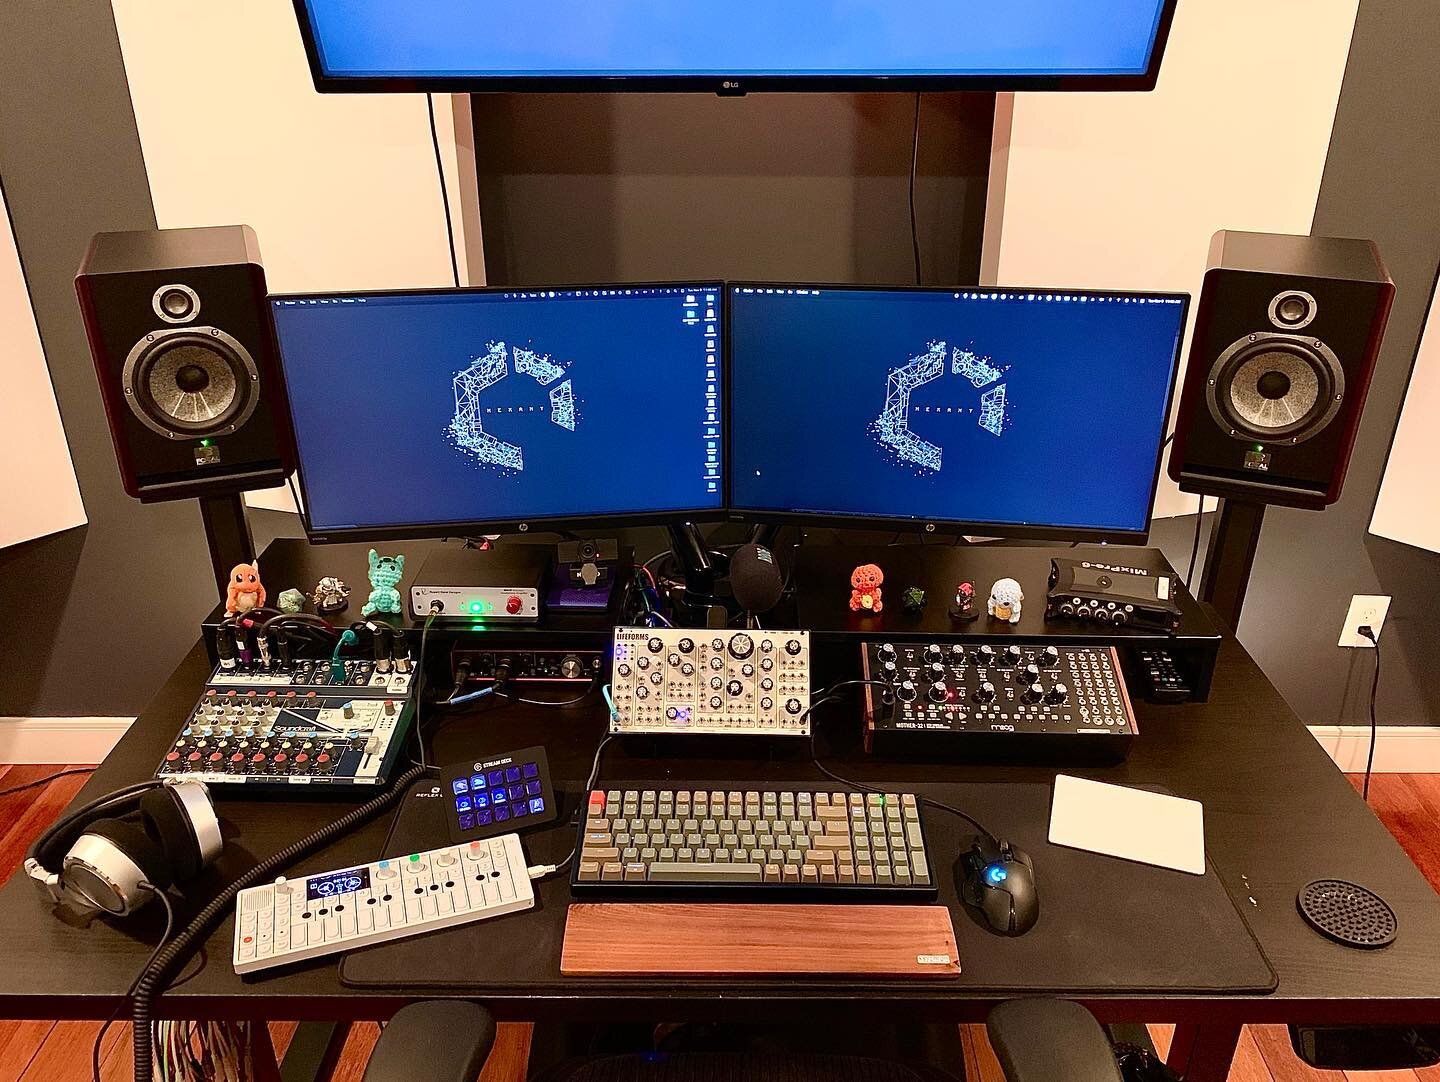 A little desk update! I&rsquo;ve been slowly collecting more and more knobs, woops!
​
​
​#hexanyaudio #gameaudio #sounddesign #sounddesigner #desksetup #desk
​